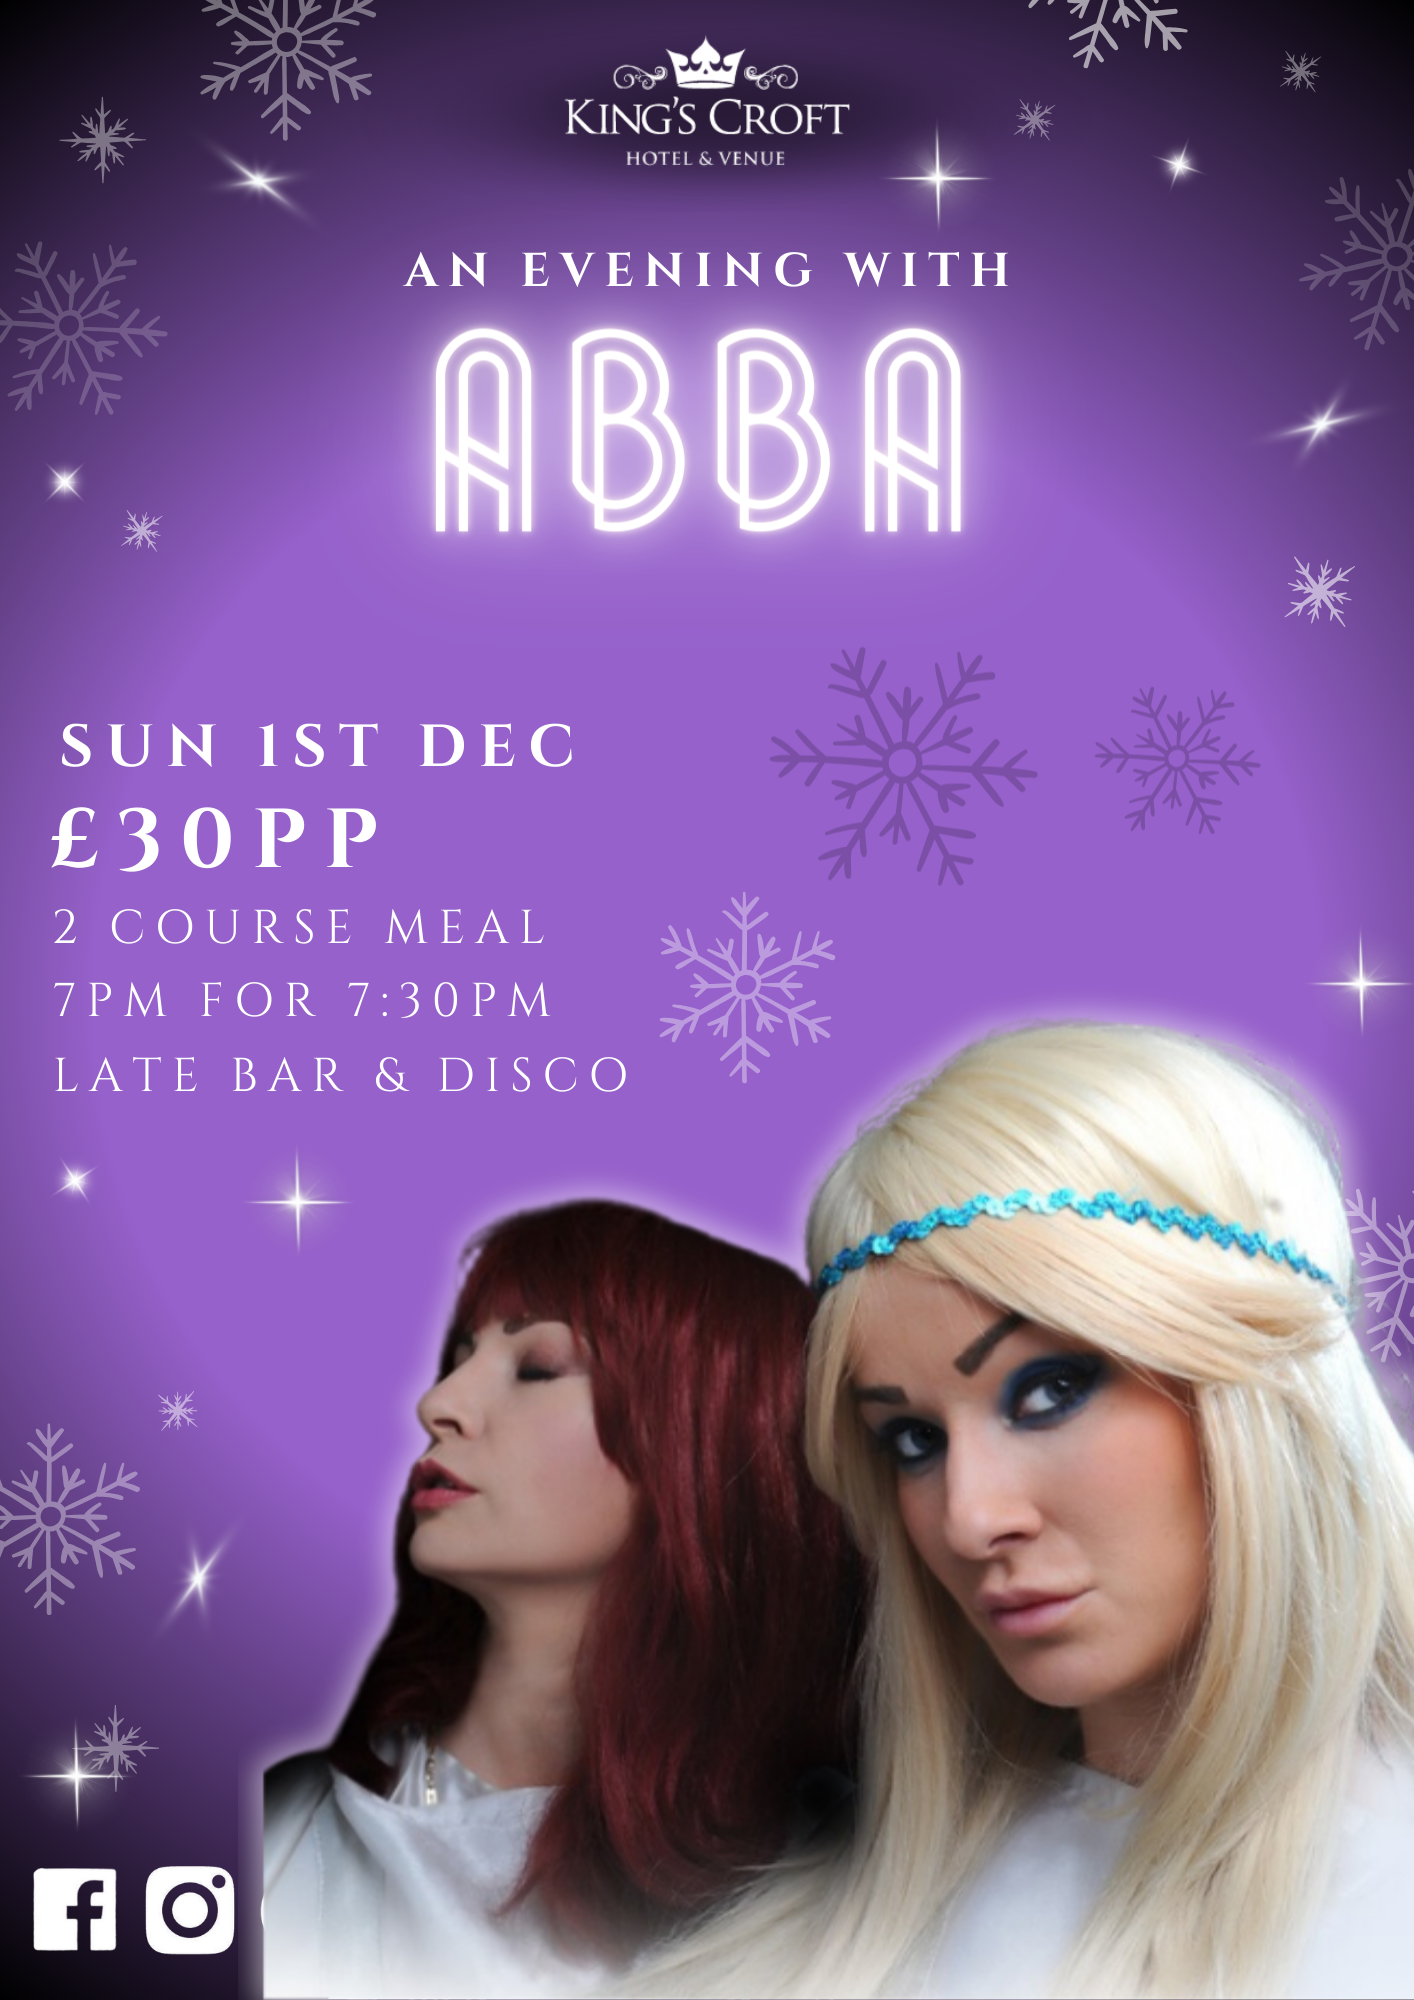 Evening with Abba